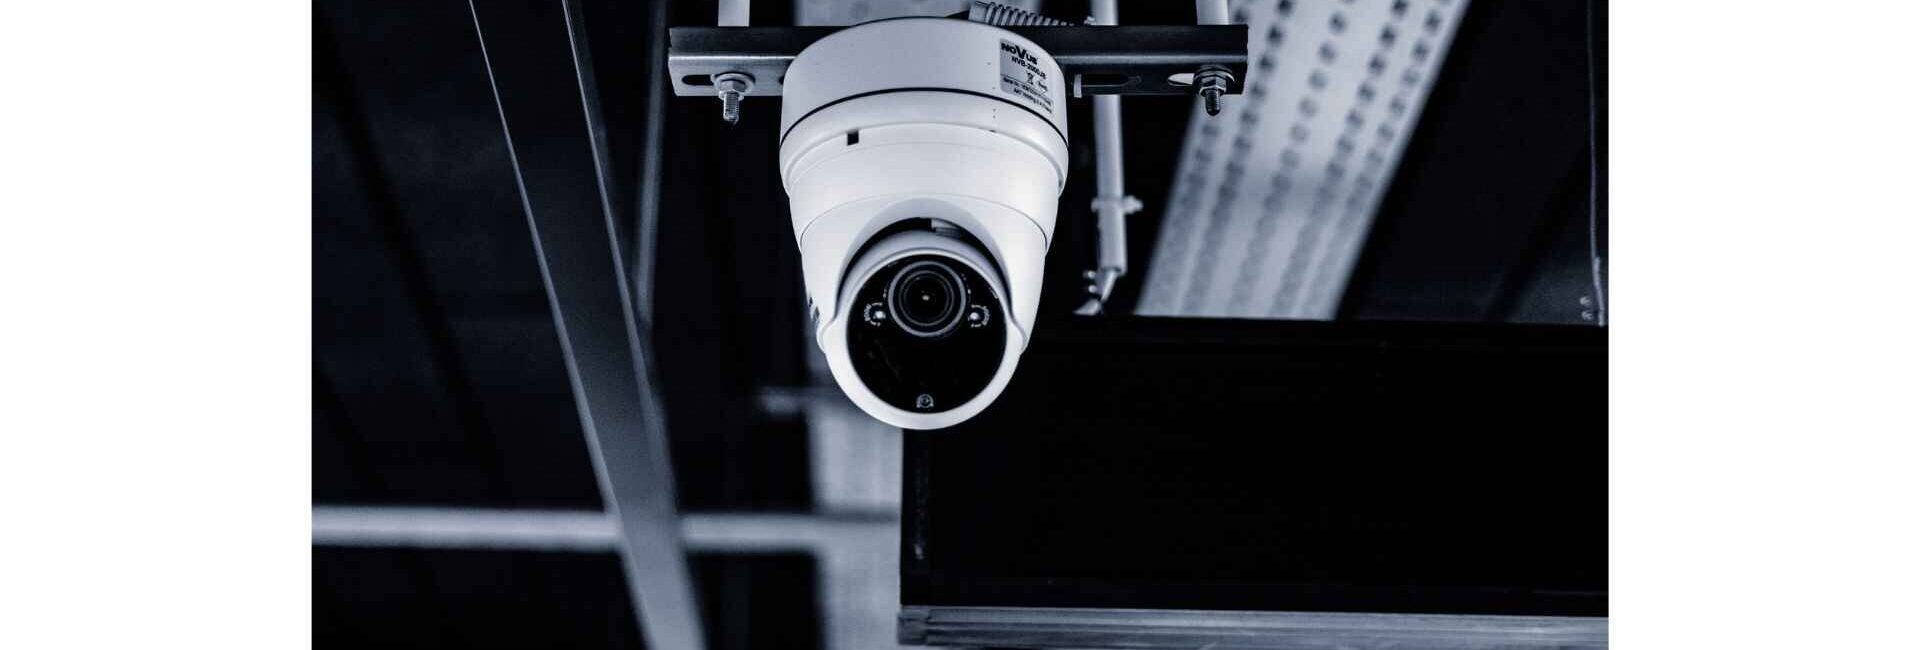 CCTV security solution and networking - Security Solutions Dealer in Noida